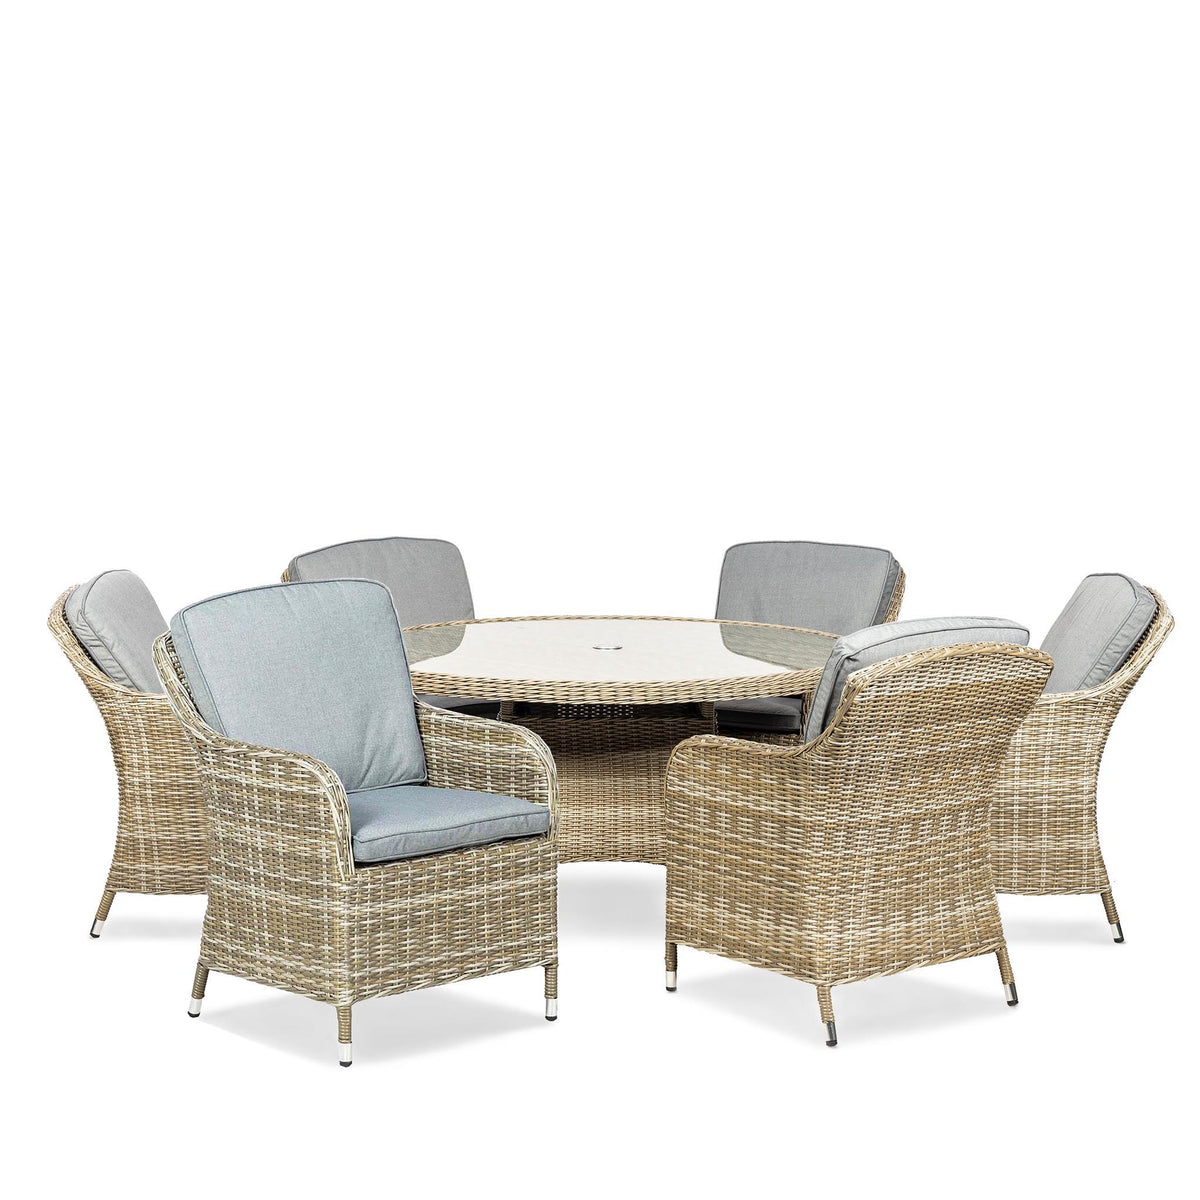 Wentworth 6 Seat 140cm Deluxe Rattan Garden Dining Set from Roseland Home Furniture